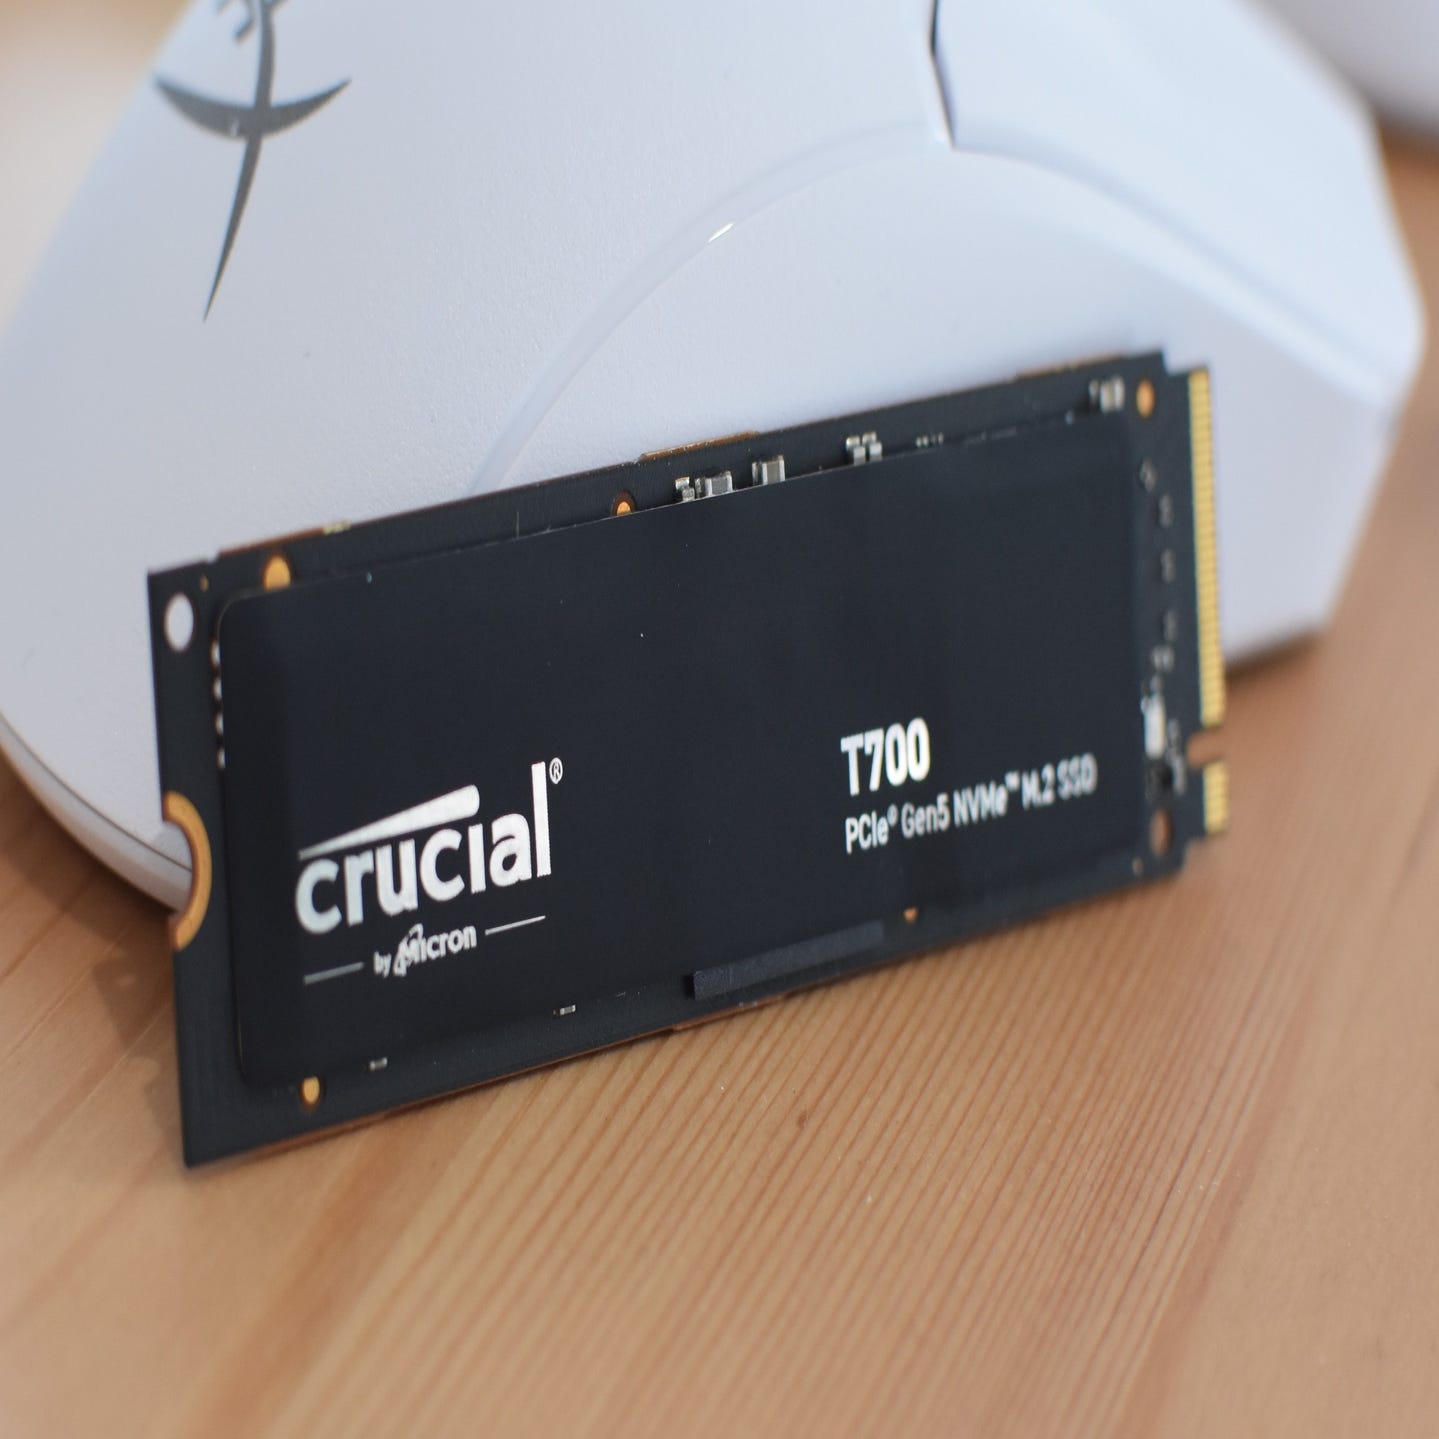 PCIe Gen5 Drives are Here! Are they Worth It?? - Crucial T700 PCIe Gen 5  NVMe SSD 